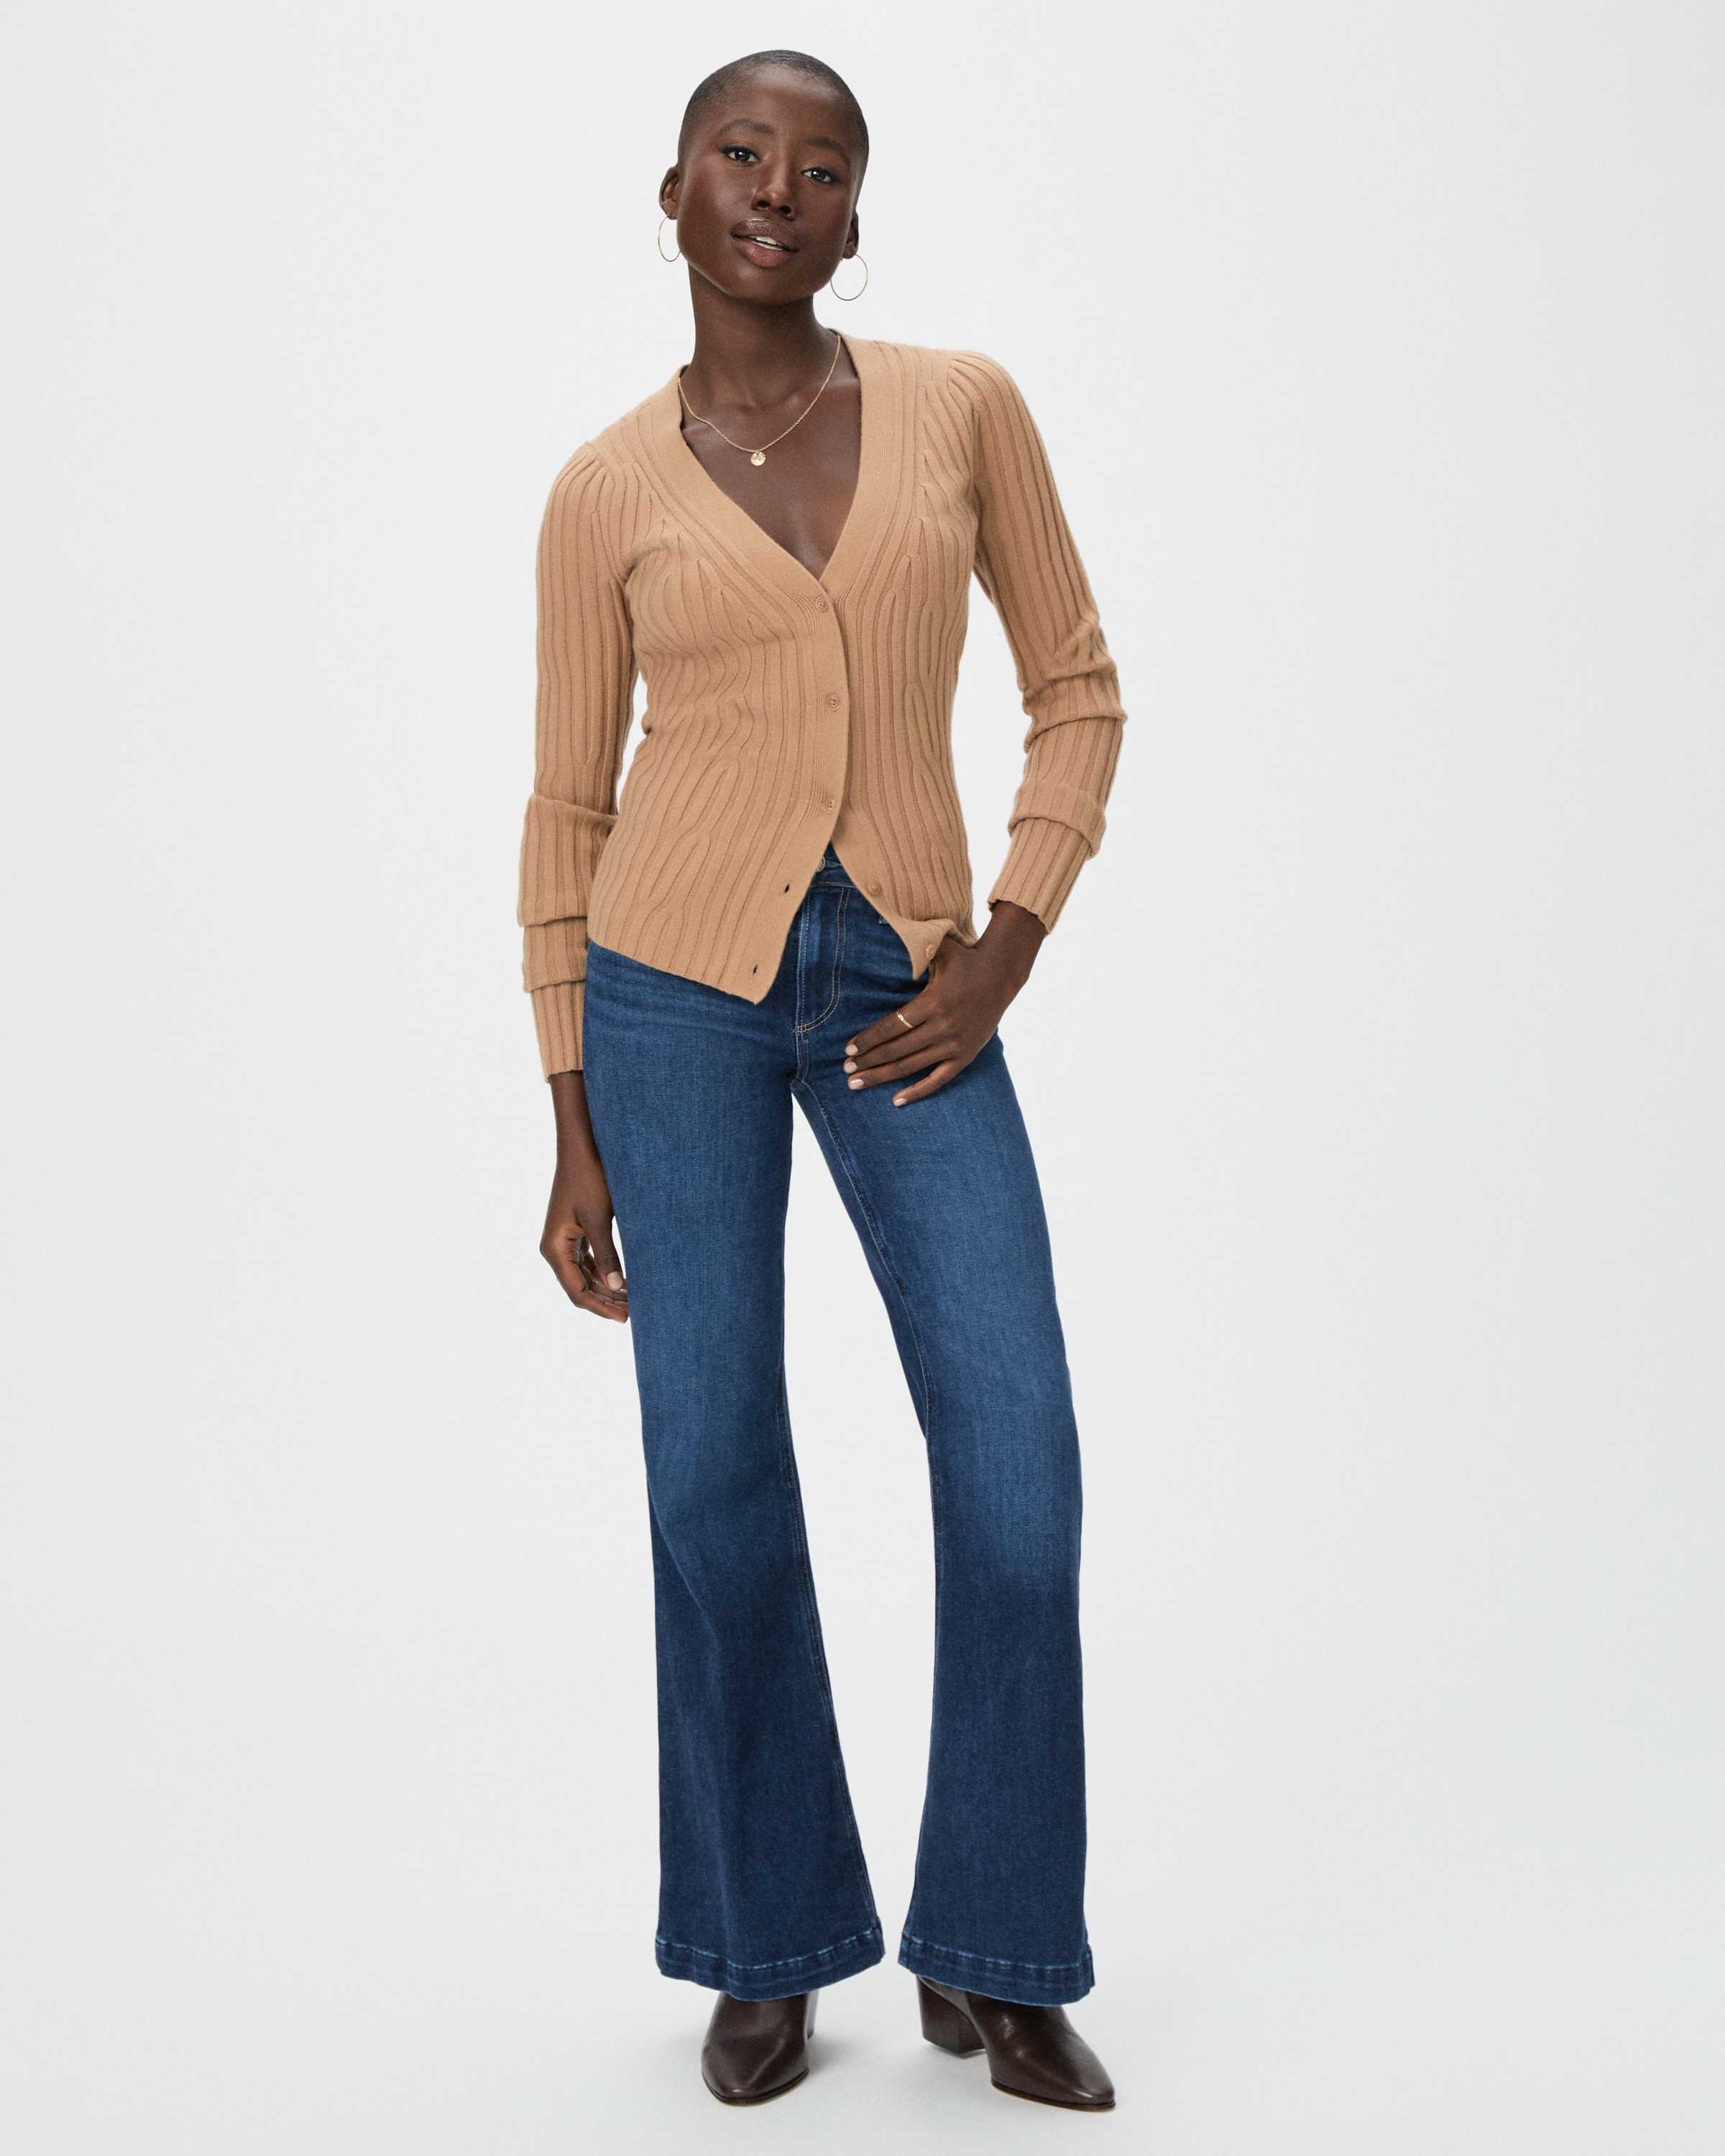 Flare Jeans That Don't Require Hemming for Short and Average Height Girls